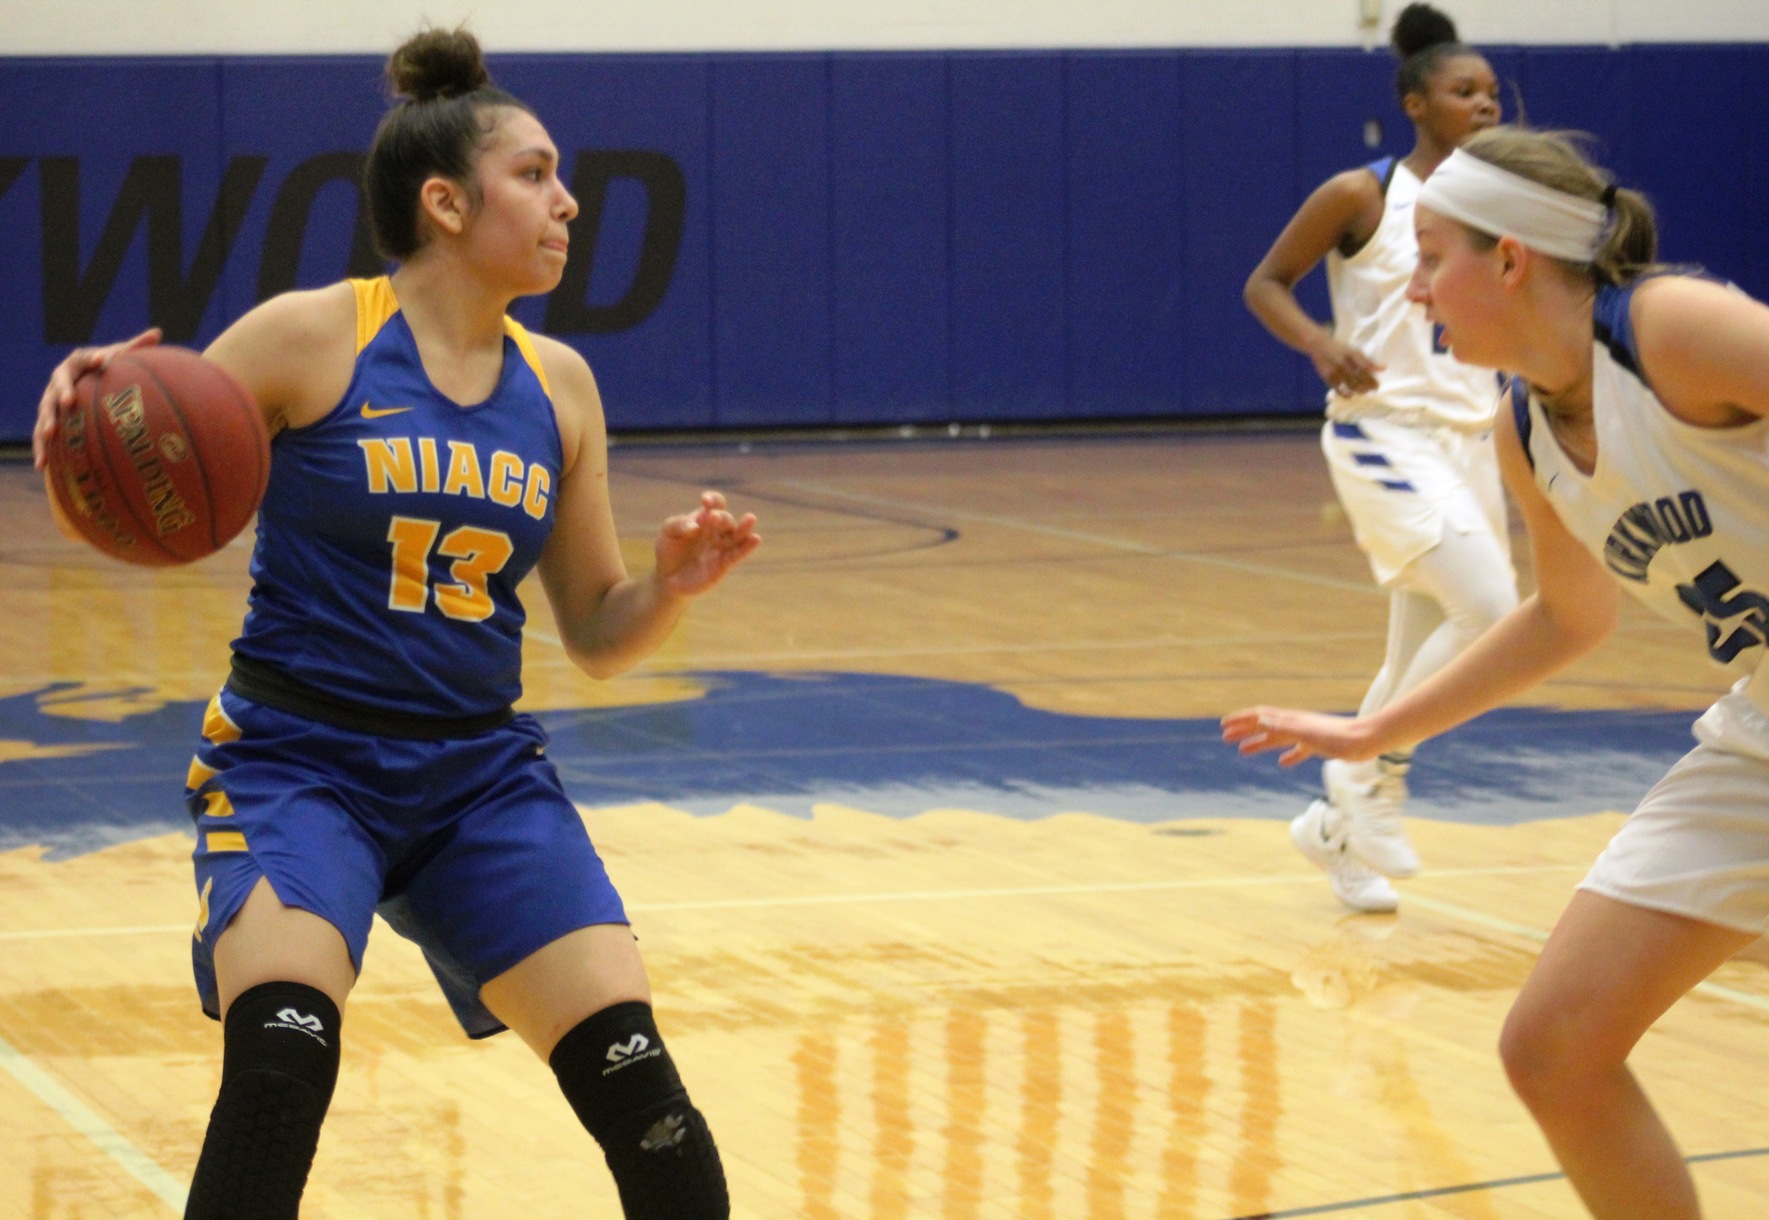 NIACC's Autam Mendez looks to pass the ball in last Saturday's game at Kirkwood.